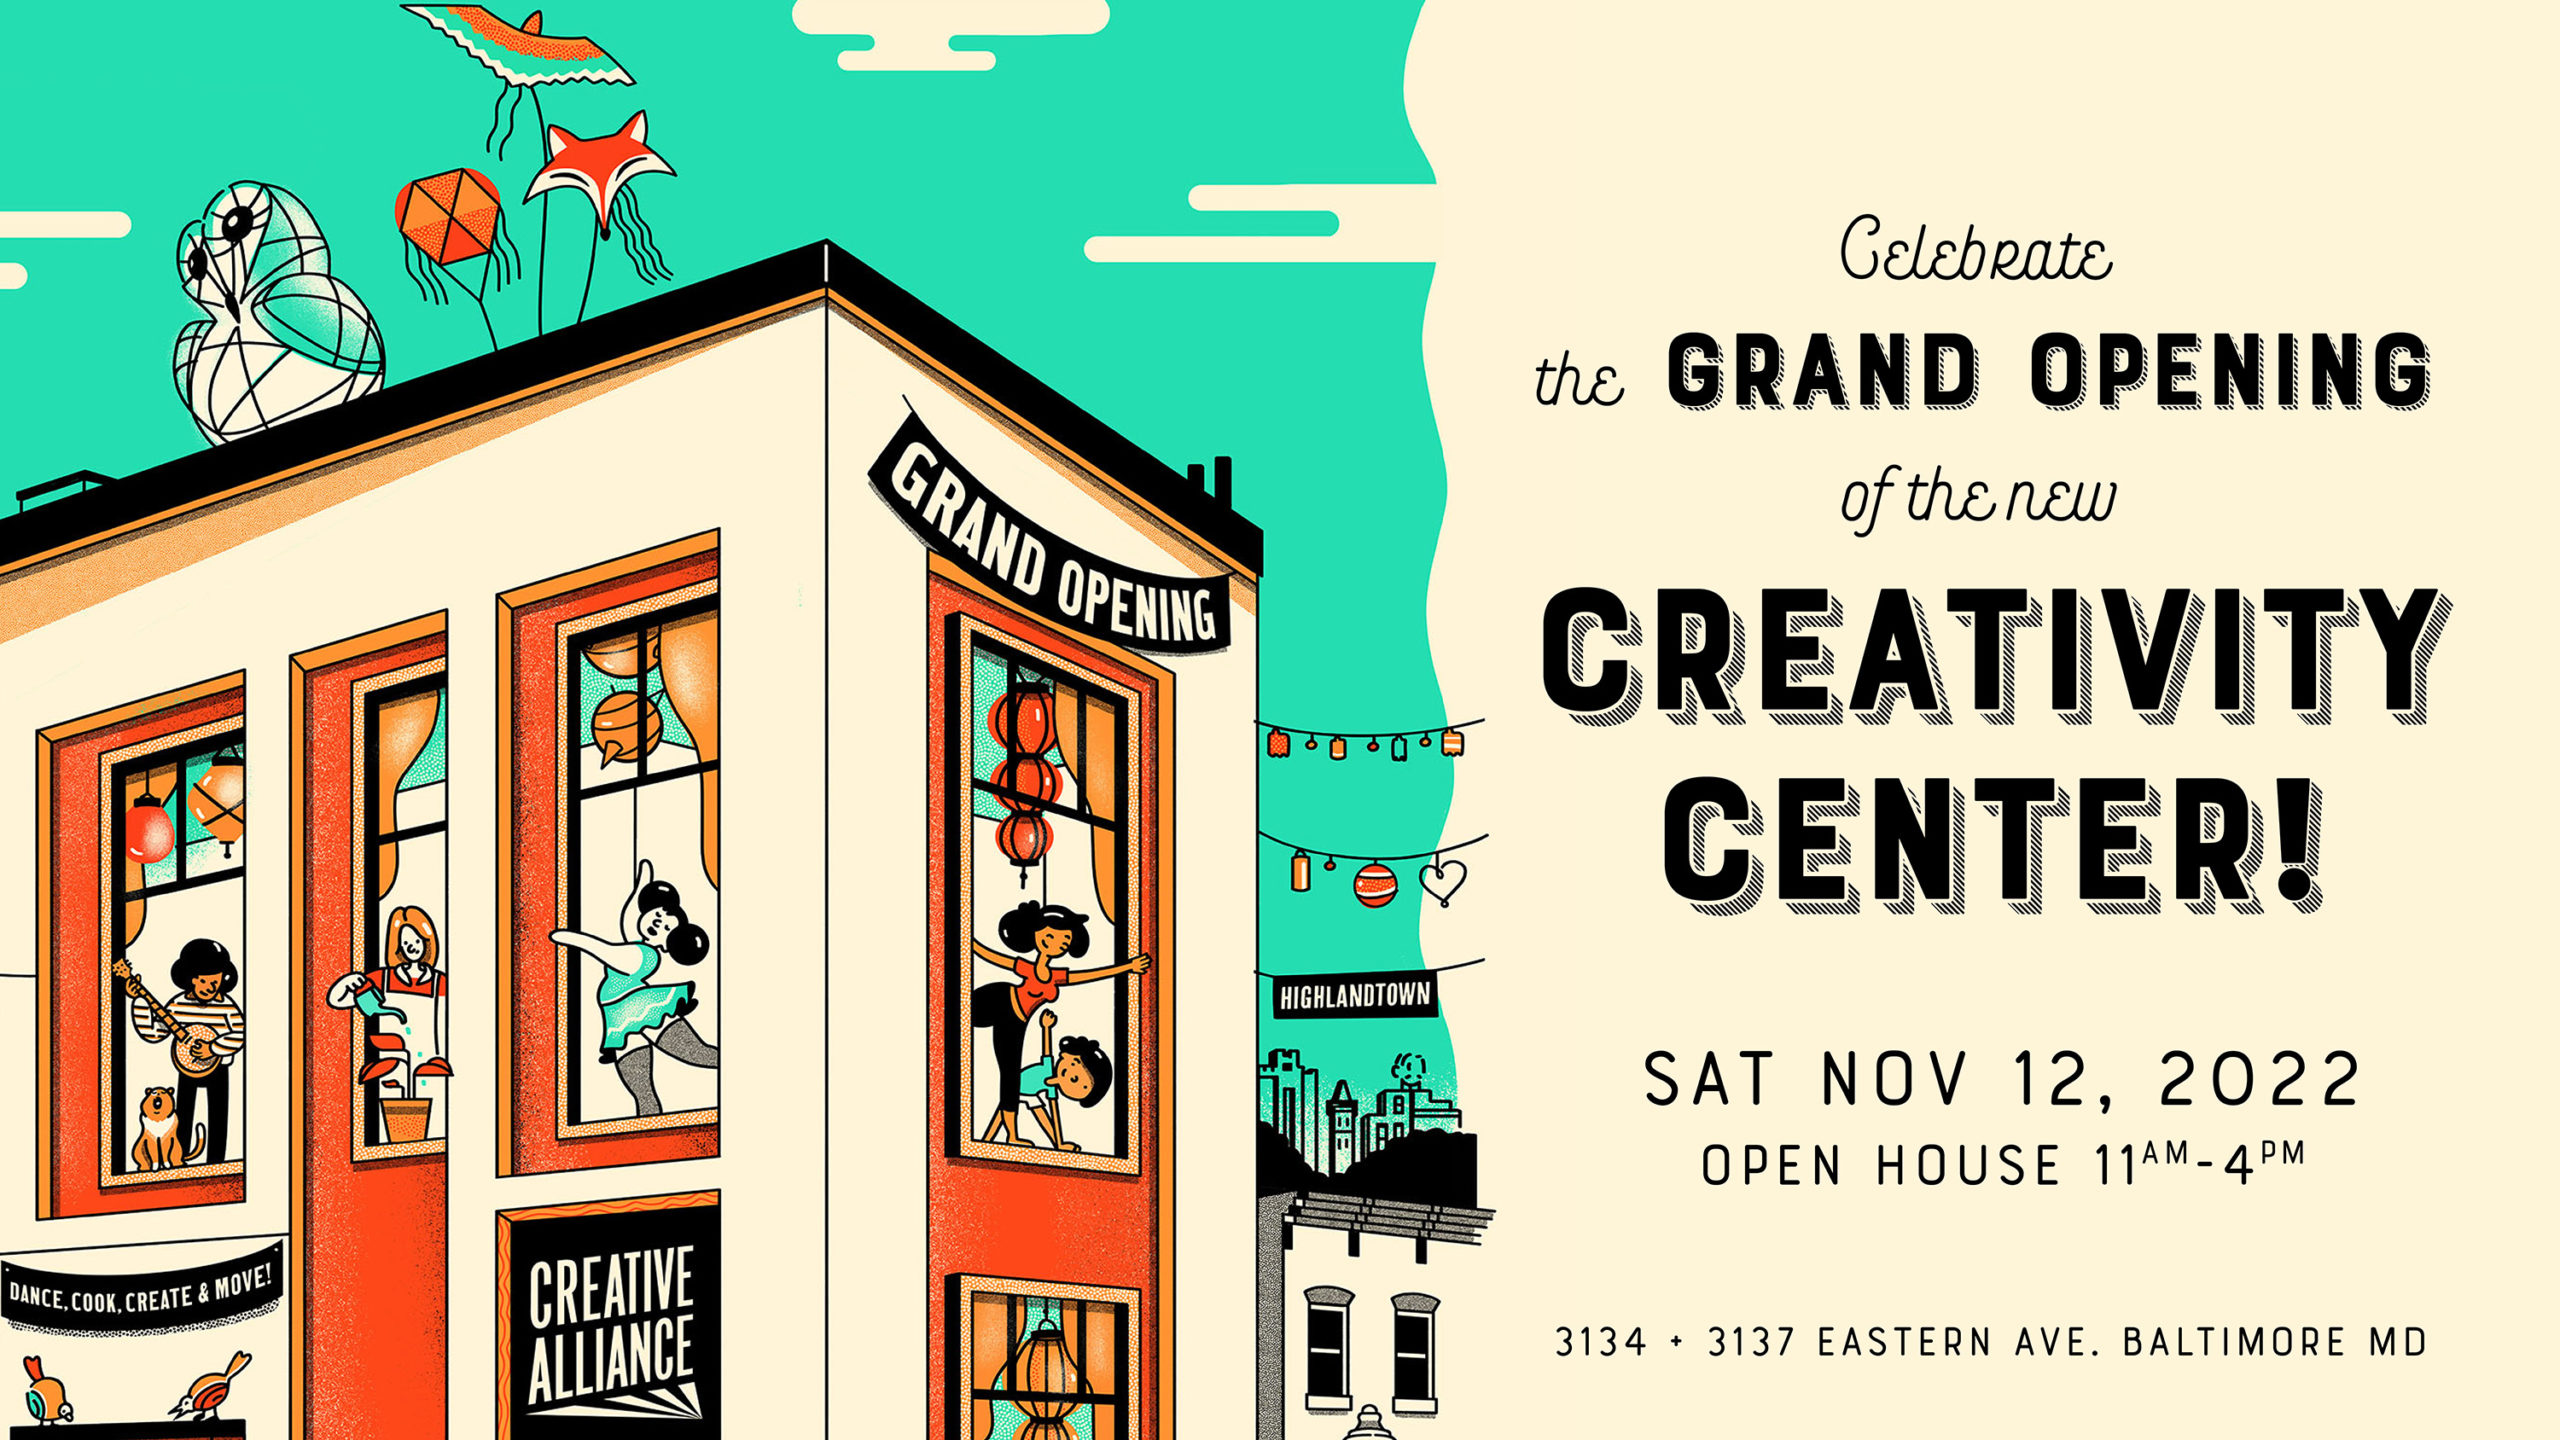 Creative Alliance | Celebrate the Grand Opening of the new Creativity Center